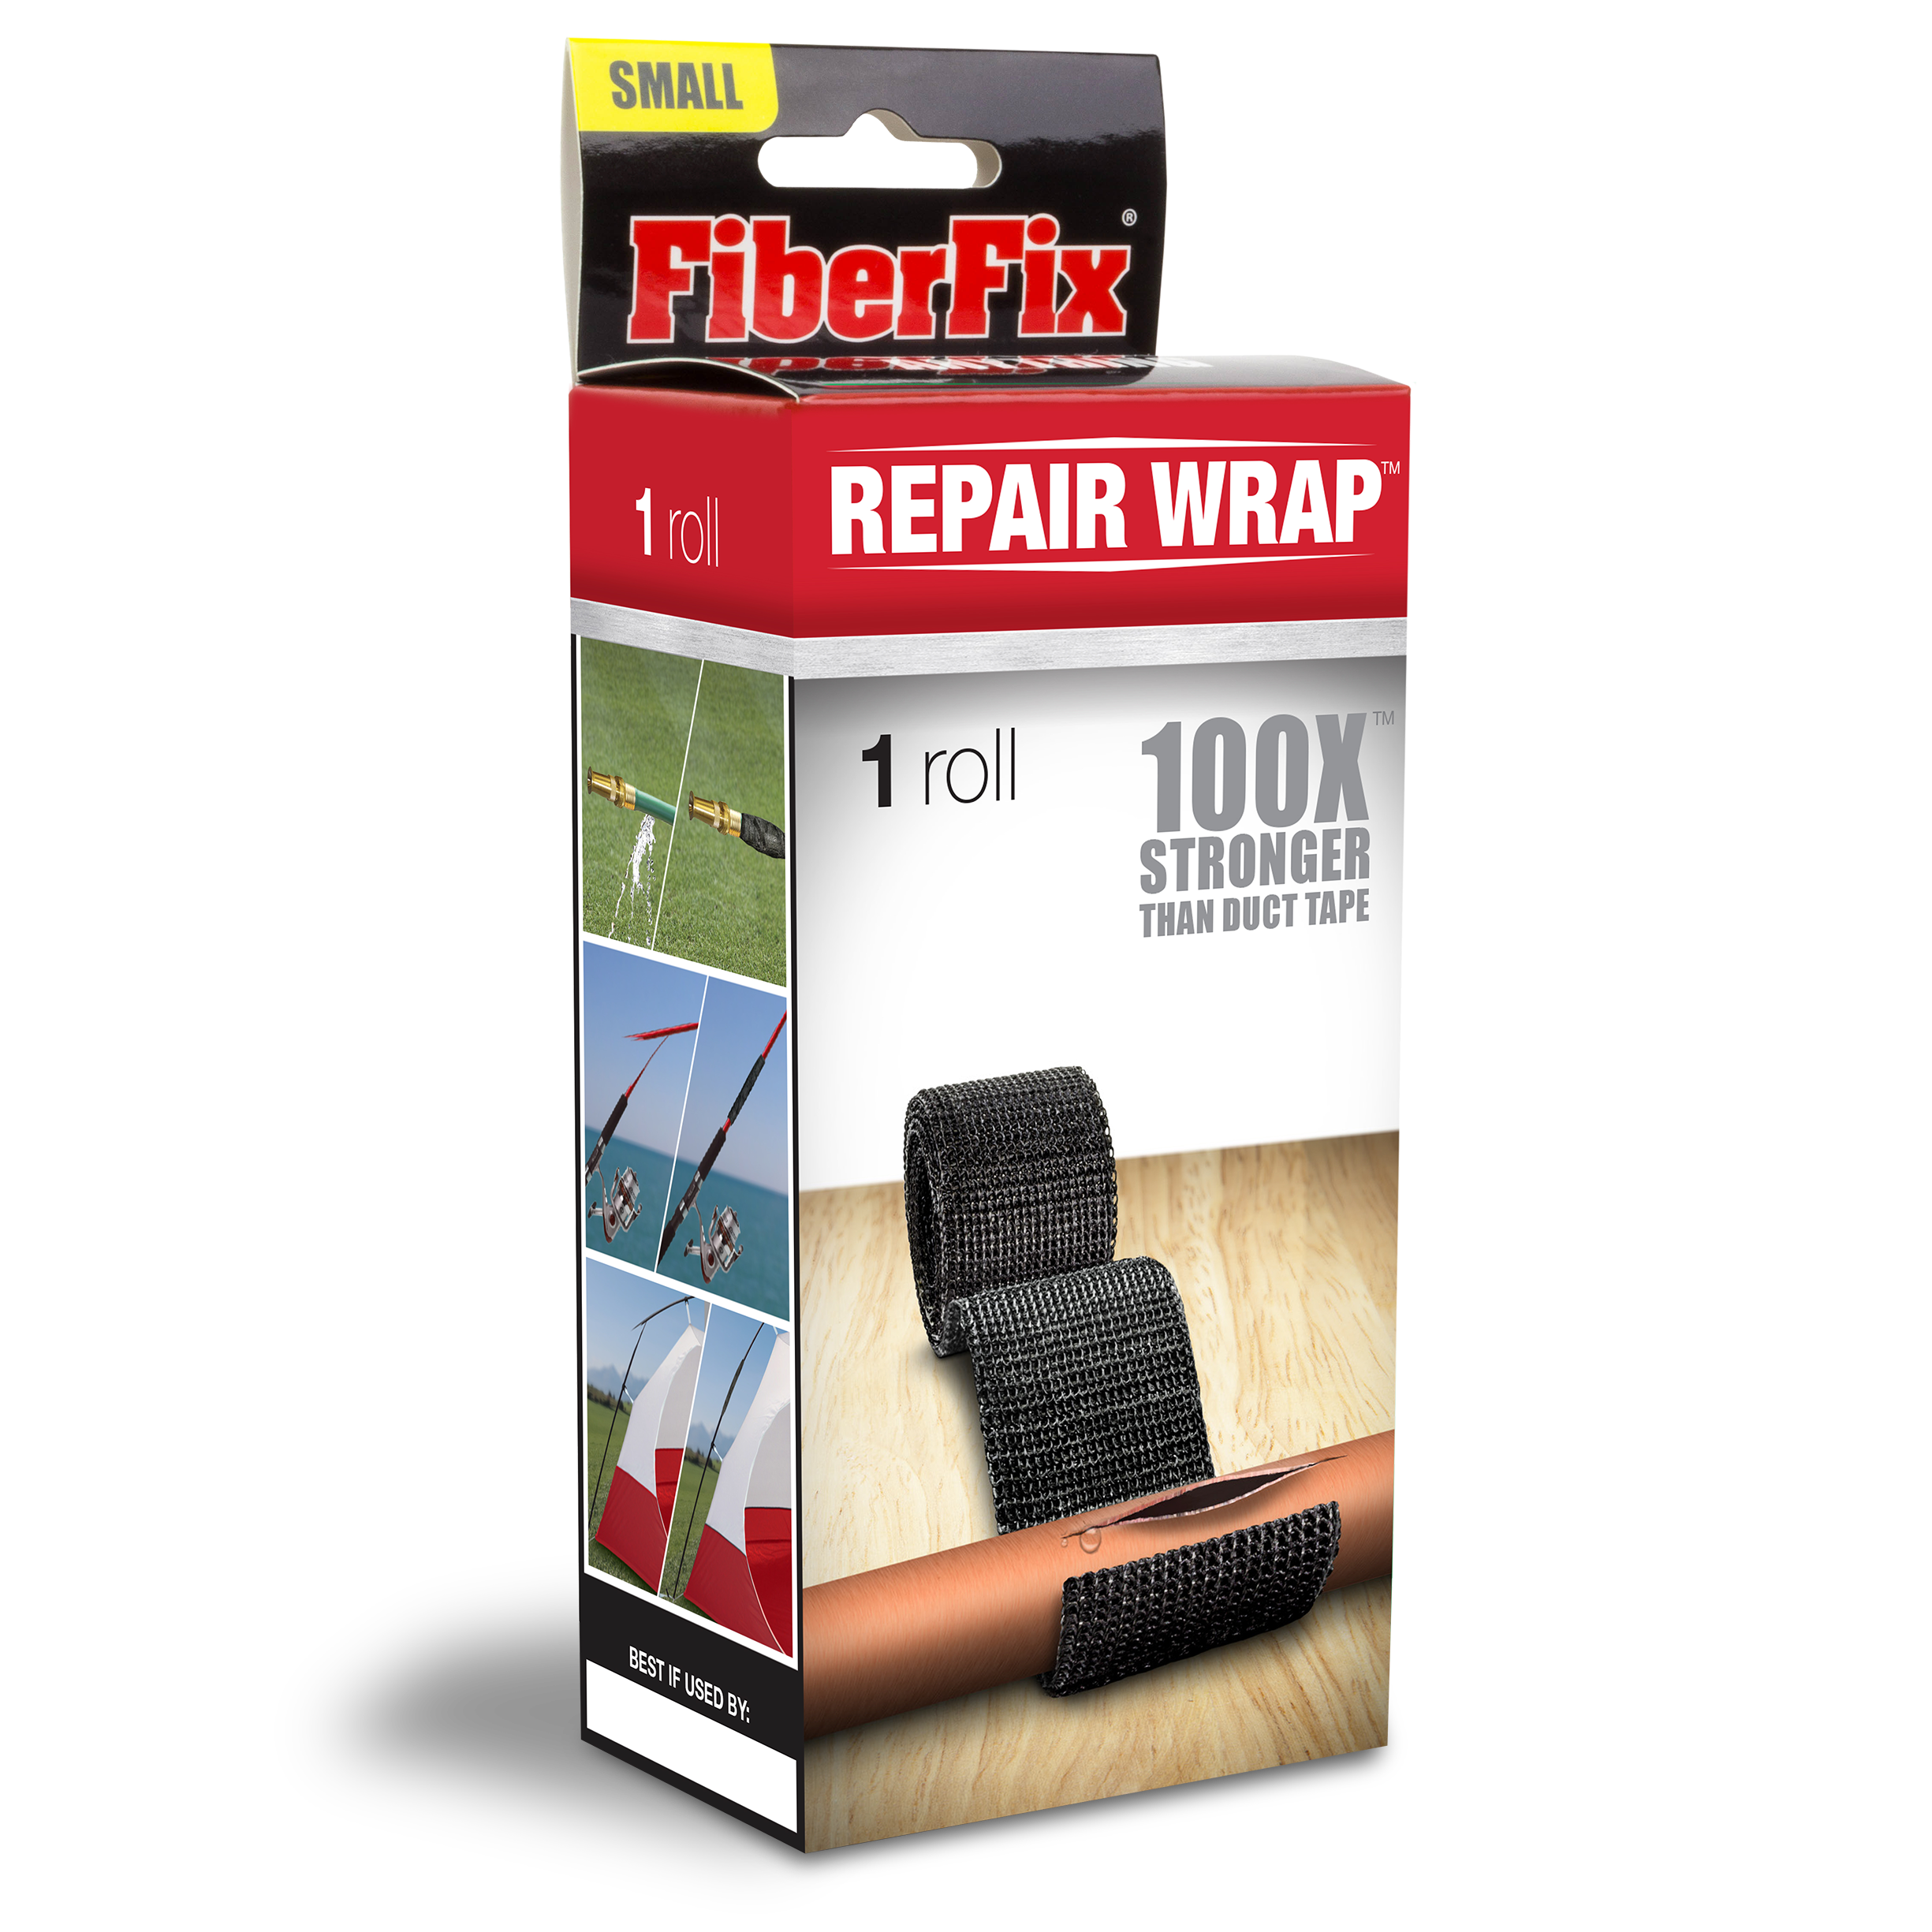 100x Stronger Than Duct Tape - Fiberfix is strong enough to make perminant repairs! 